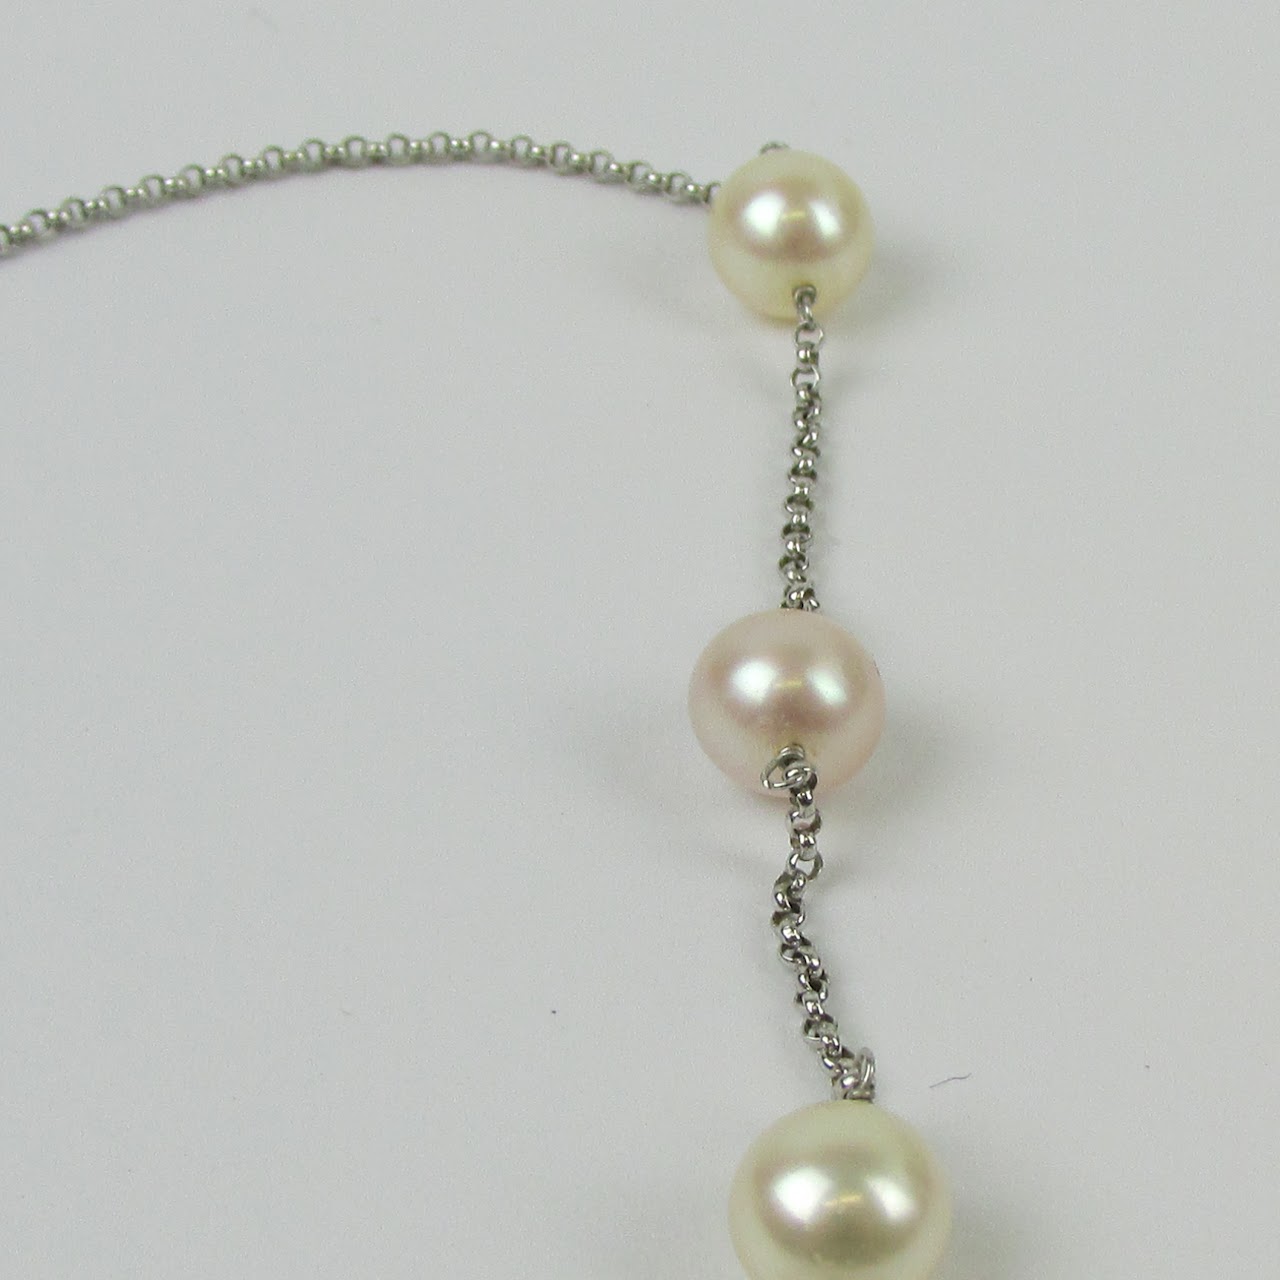 14K White Gold Pearl Station Necklace